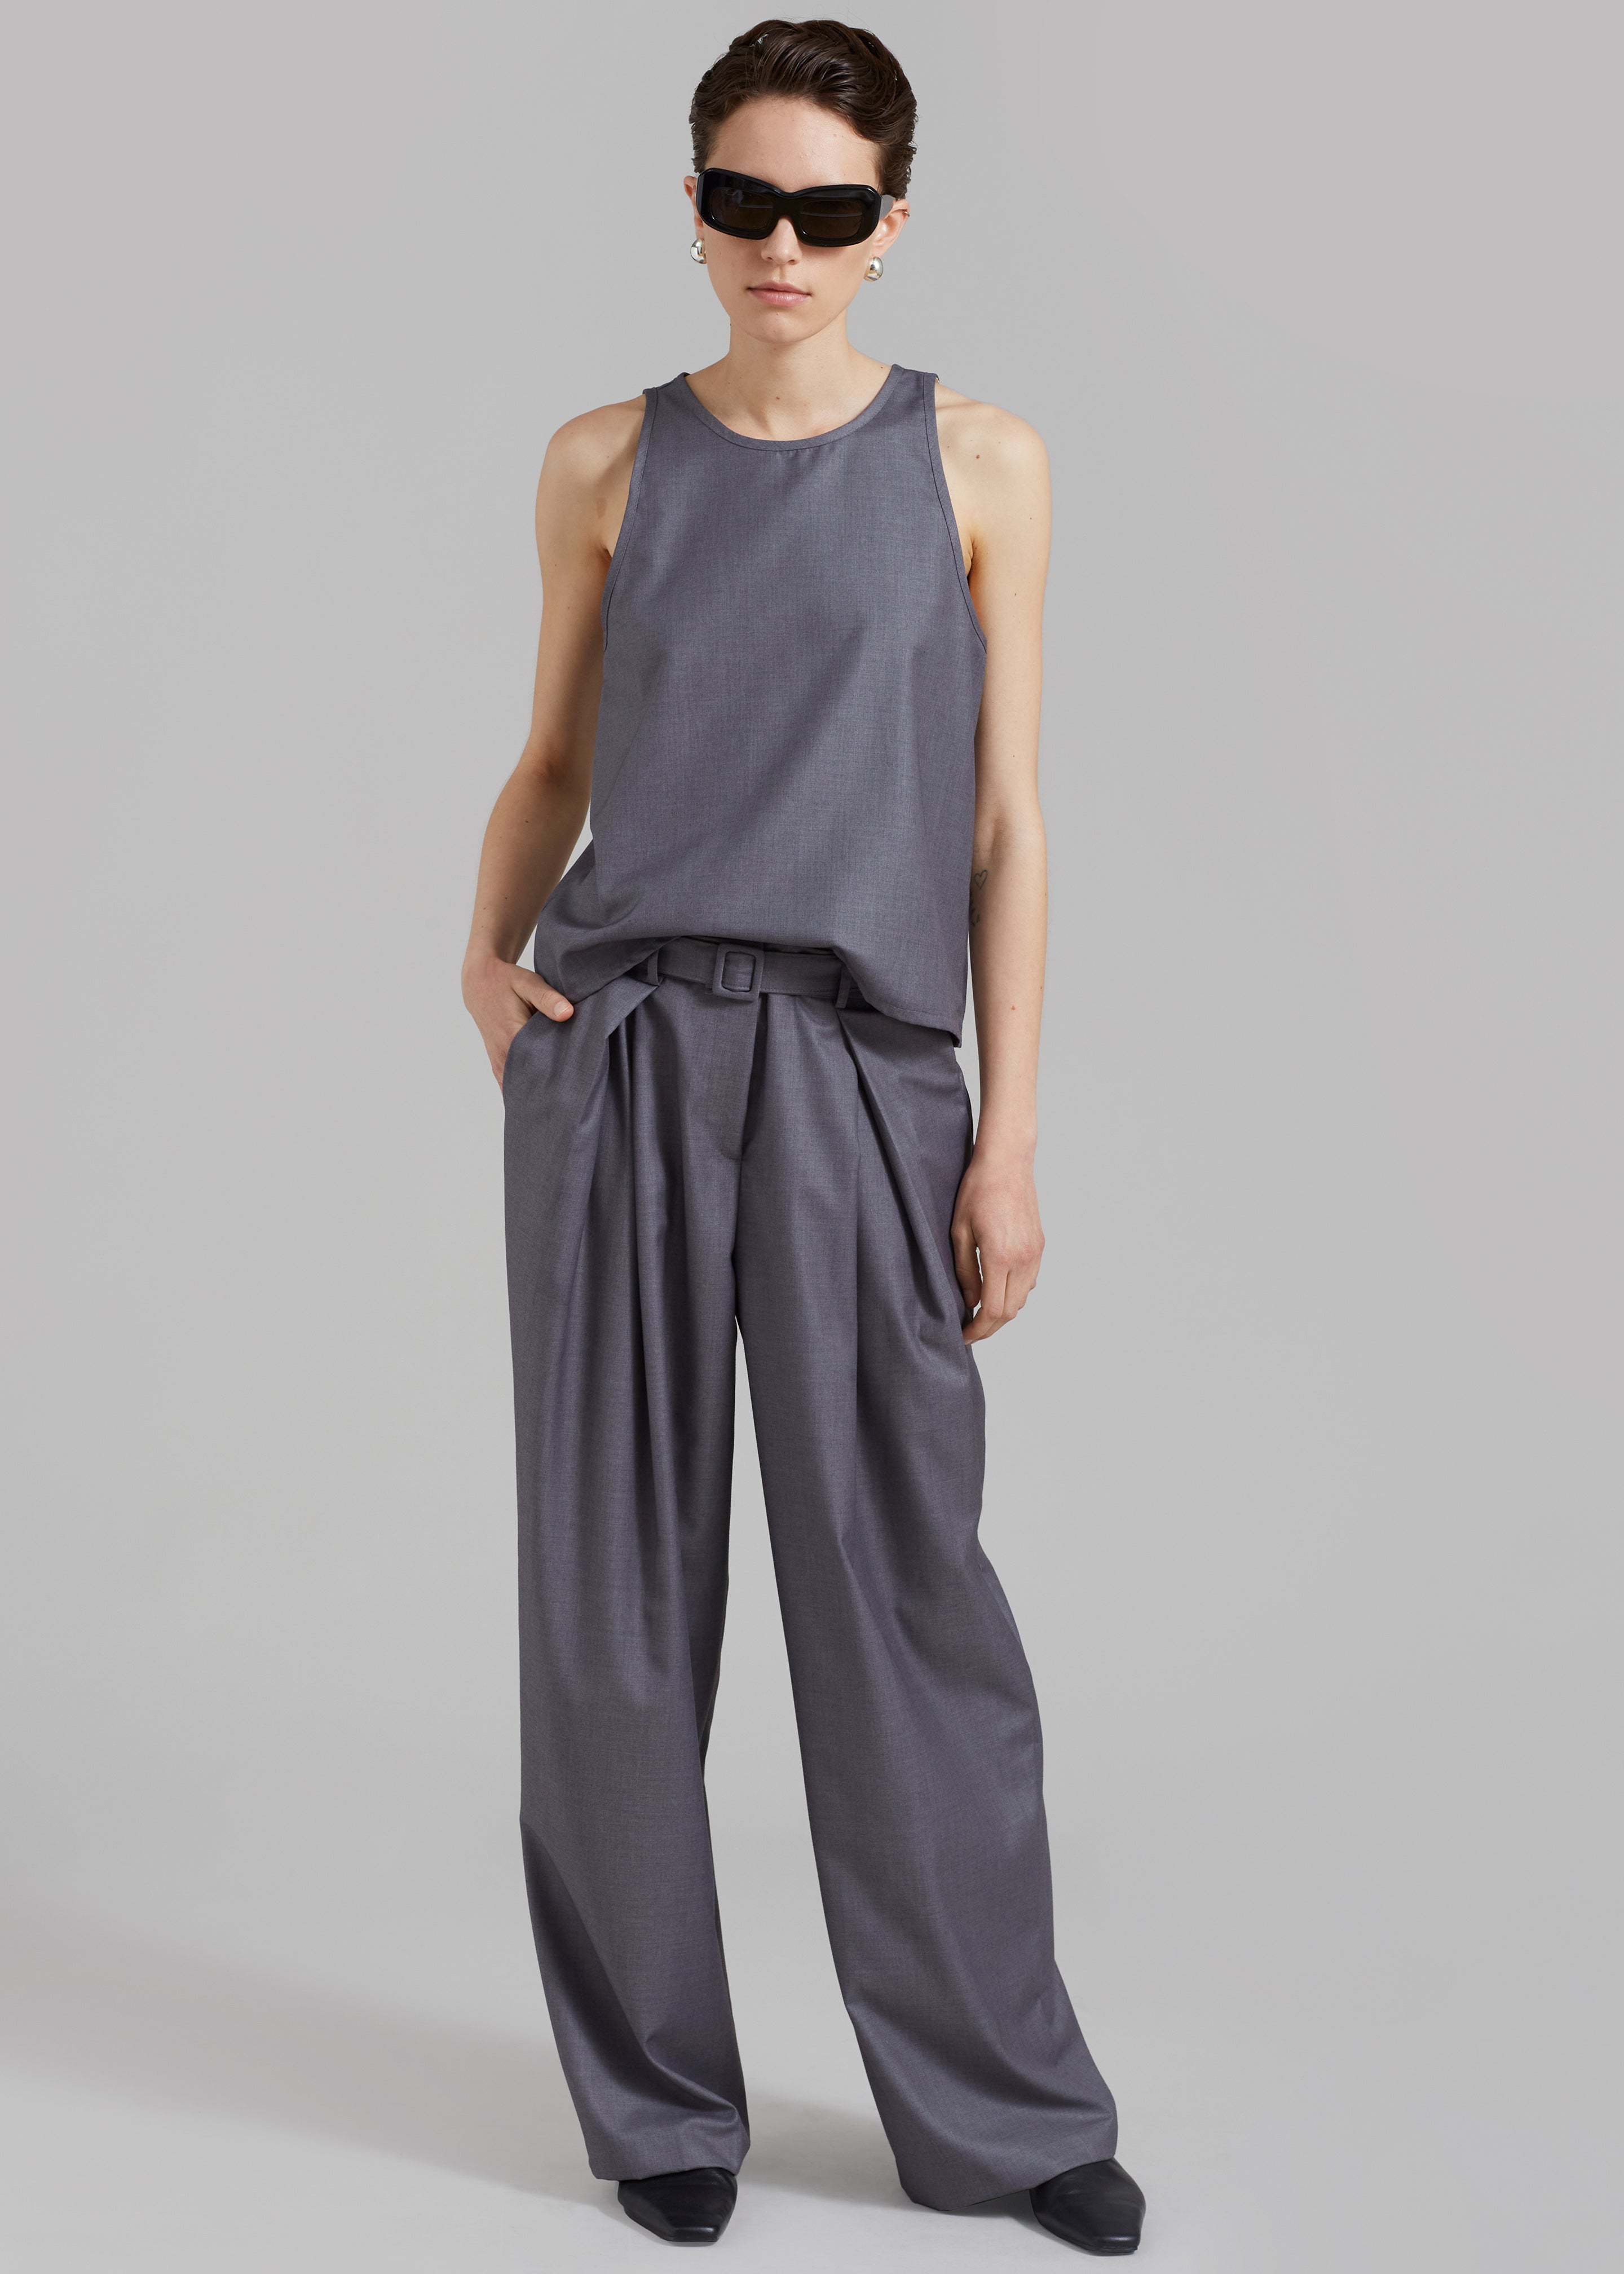 Clay Belted Pants - Grey – Frankie Shop Europe